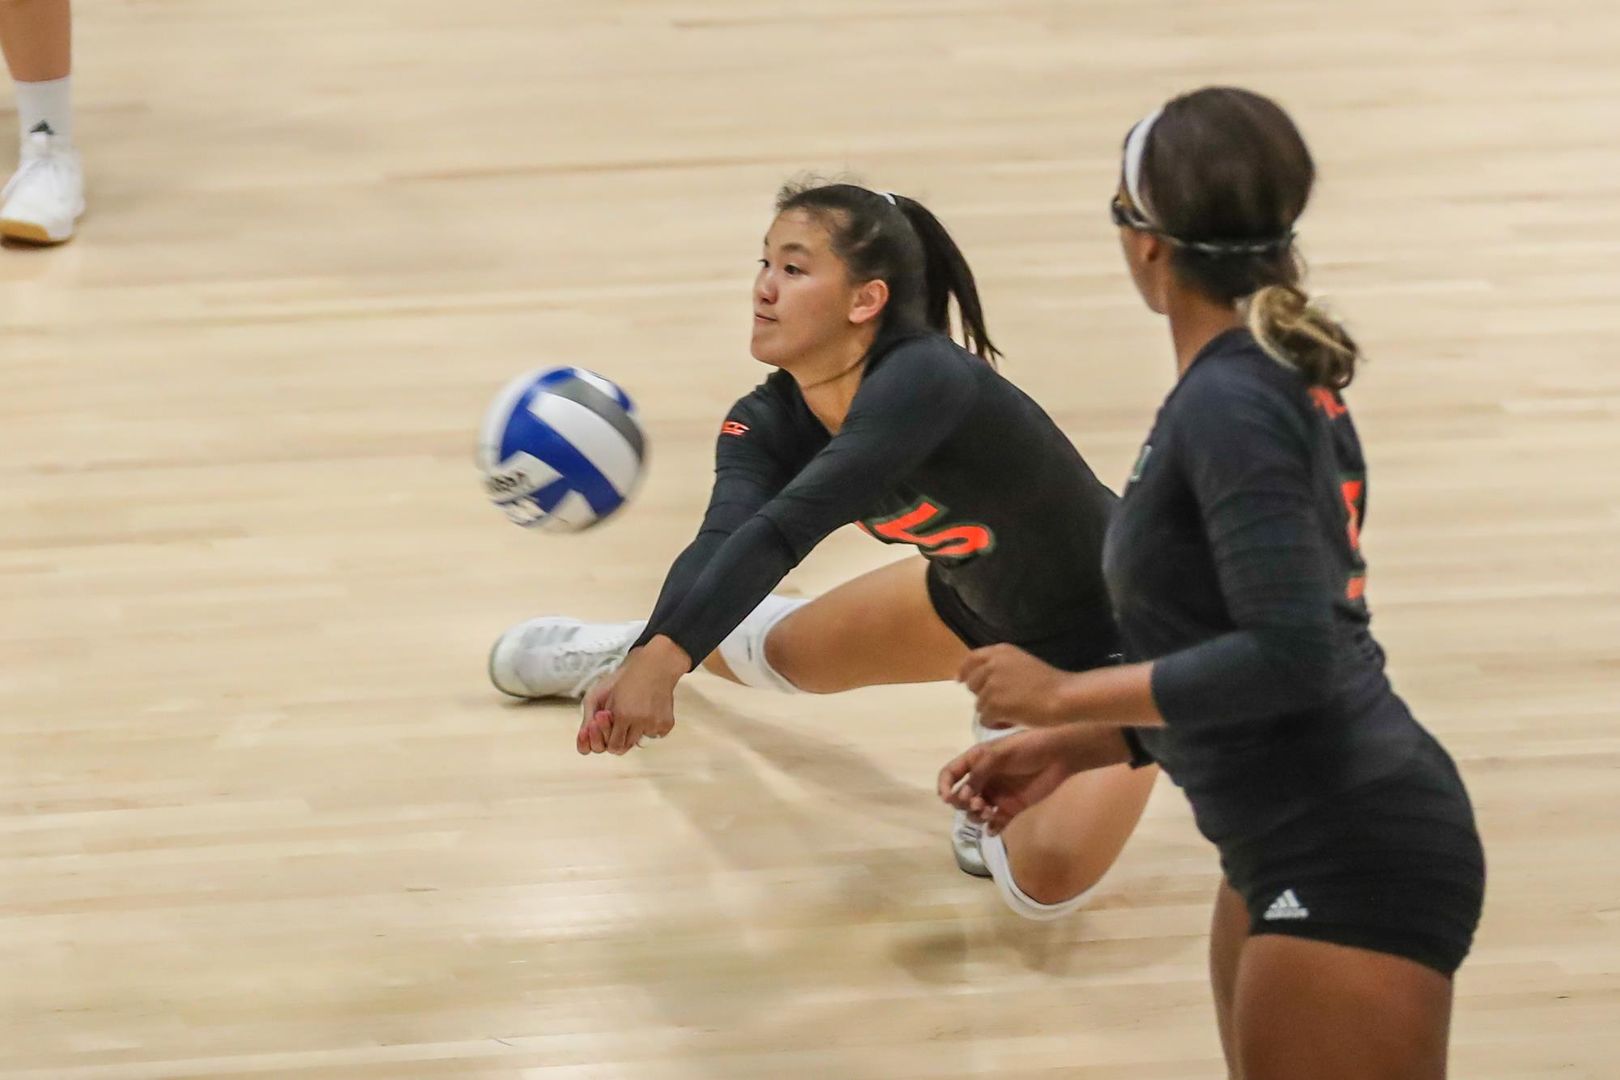 Miami Drops Match at NC State, 3-0